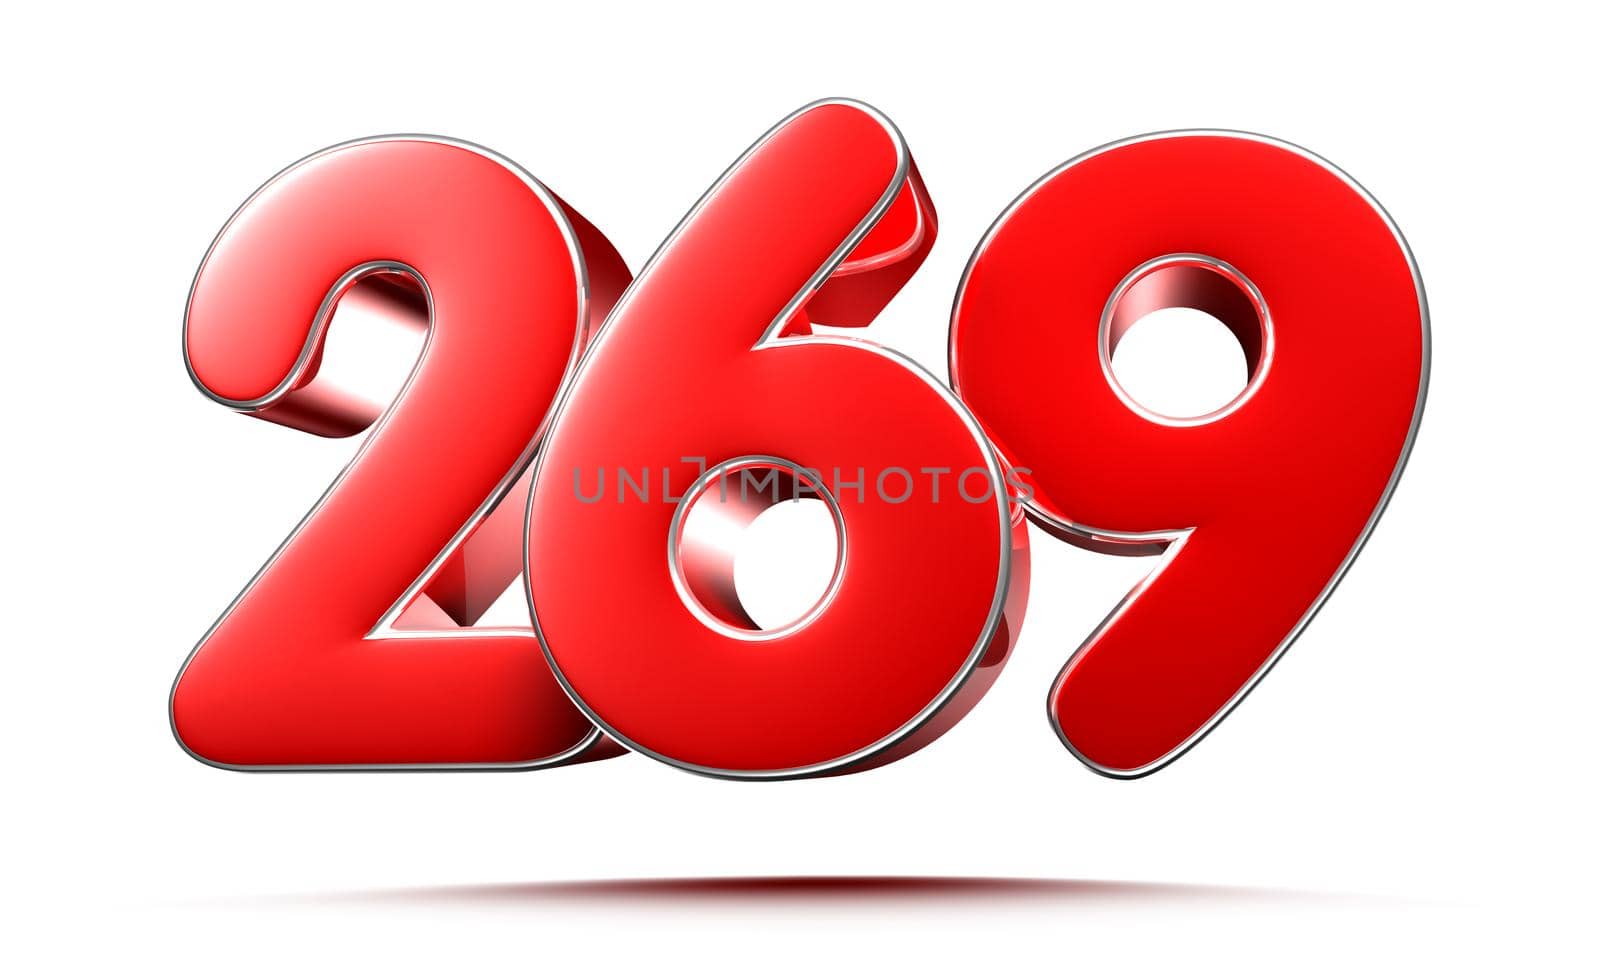 Rounded red numbers 269 on white background 3D illustration with clipping path by thitimontoyai